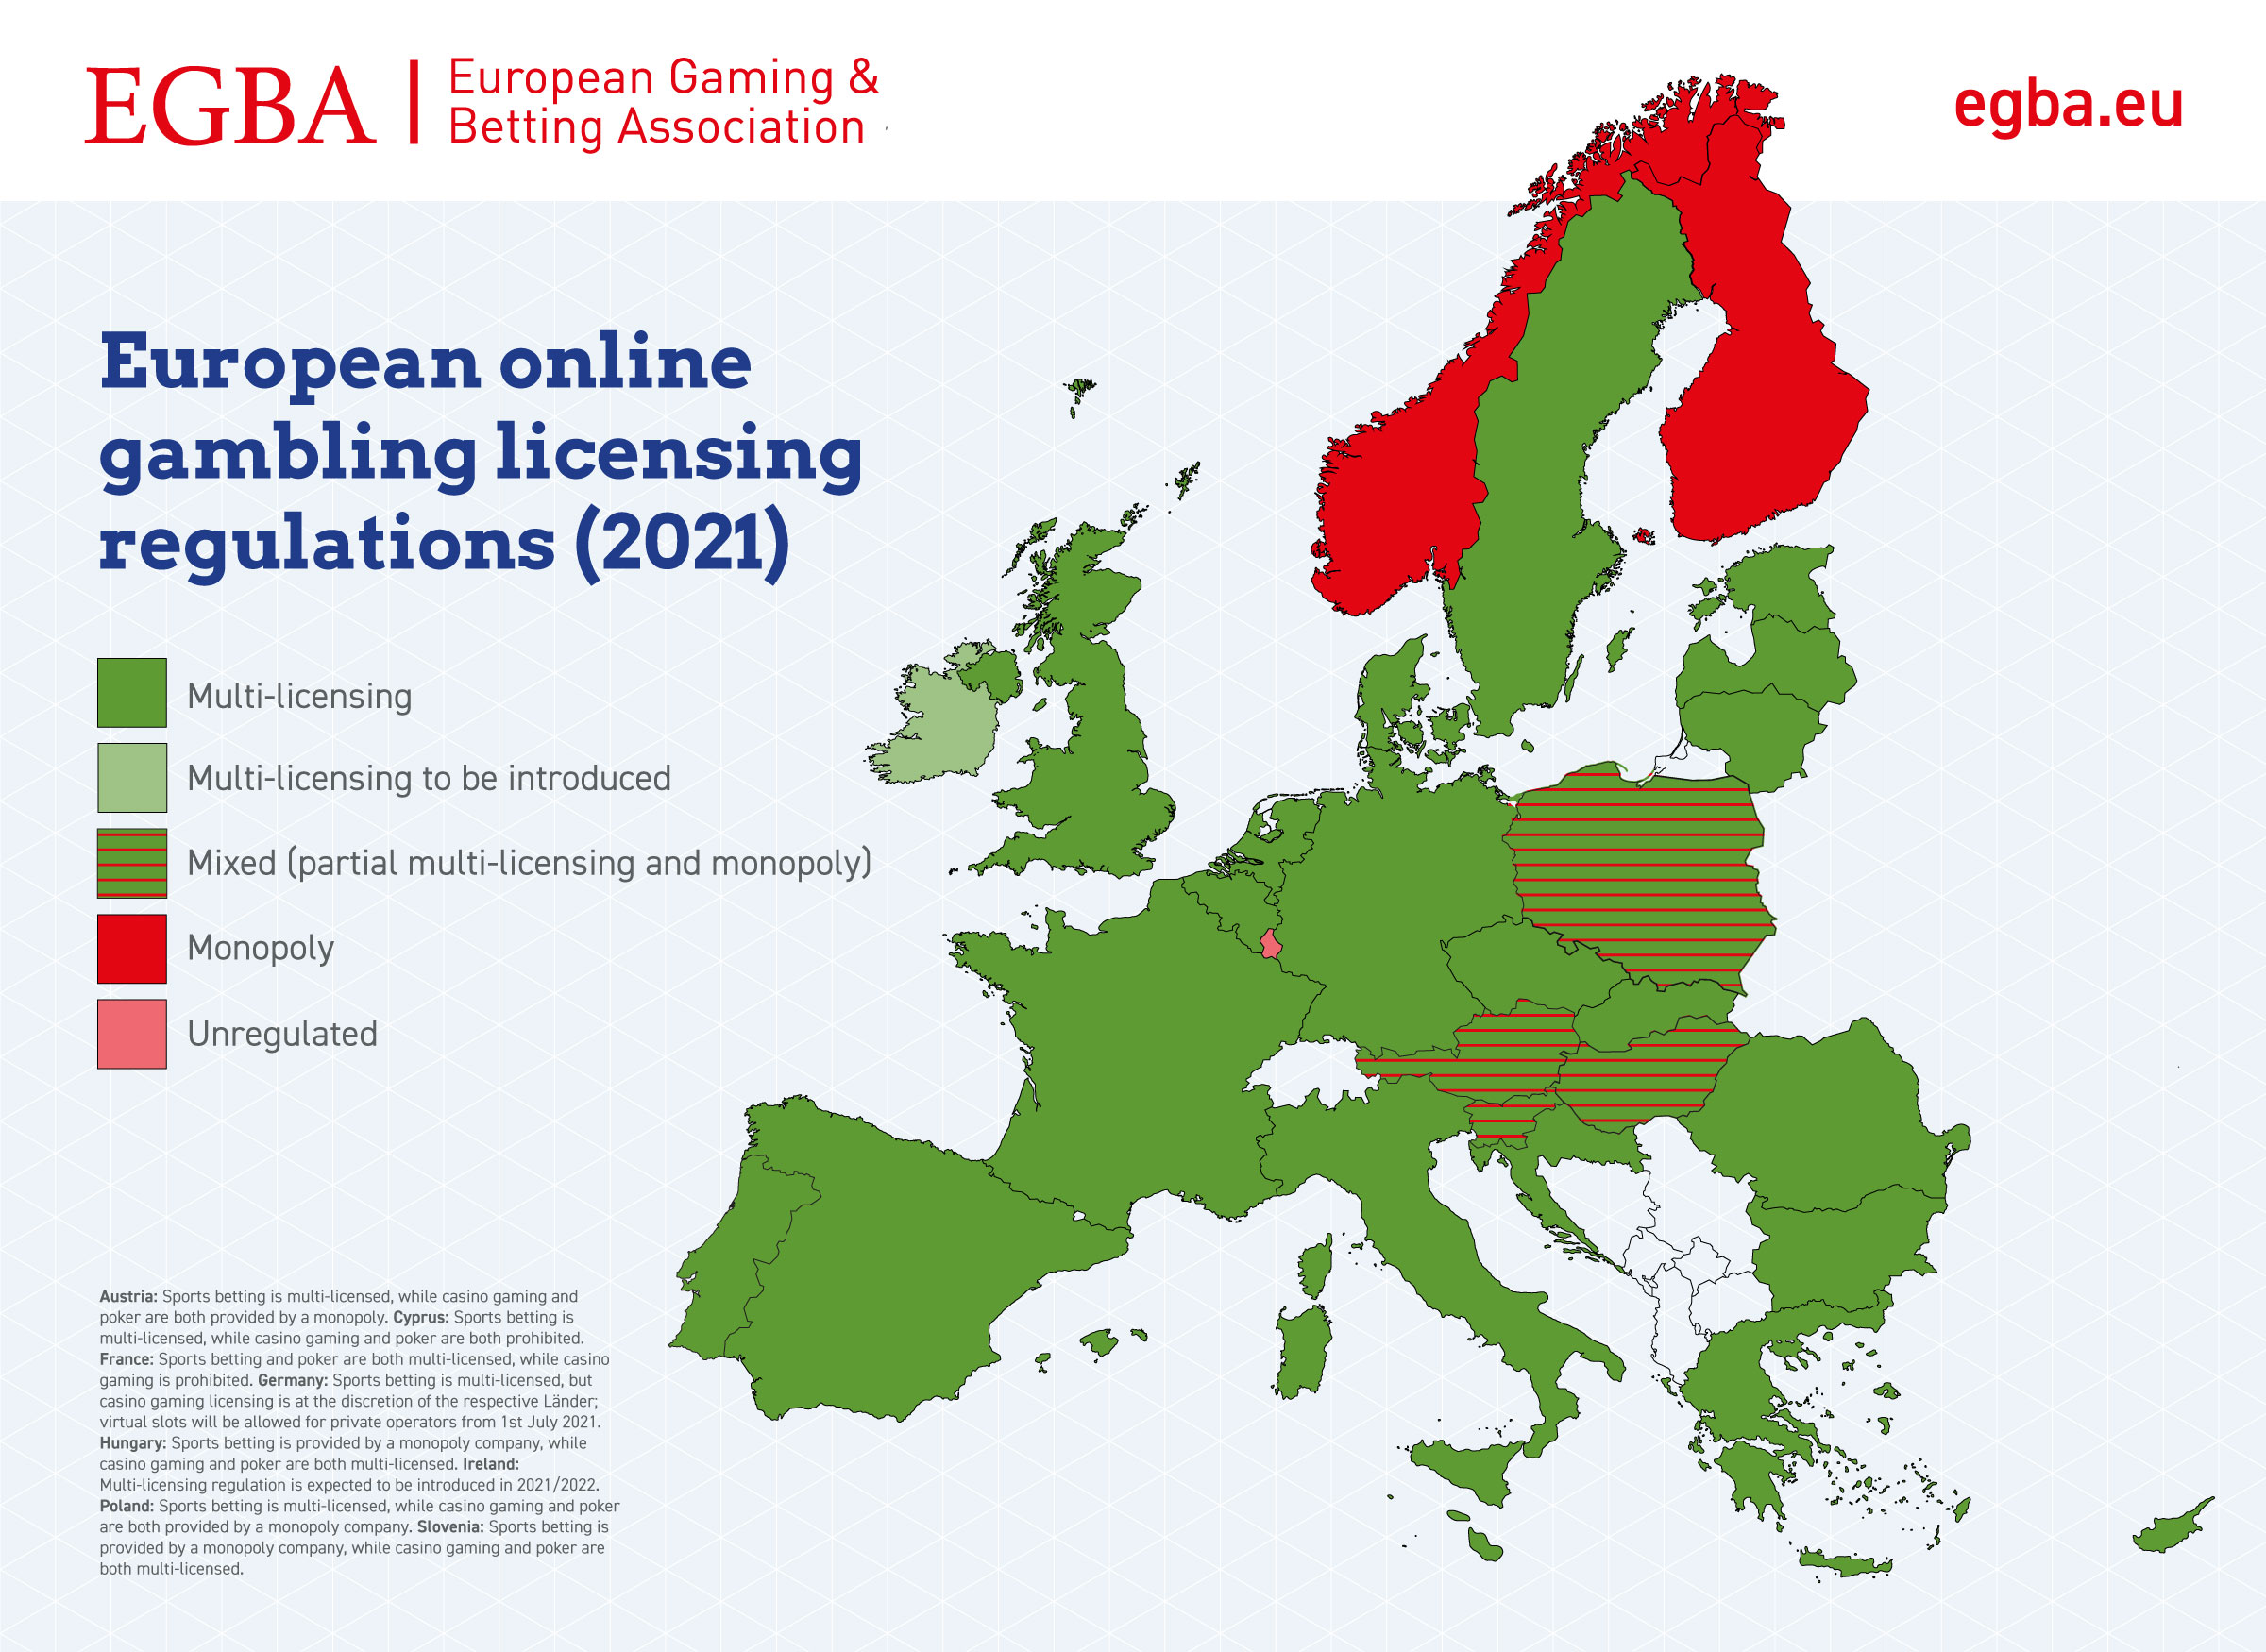 Regulations for online gaming companies in Europe - overview